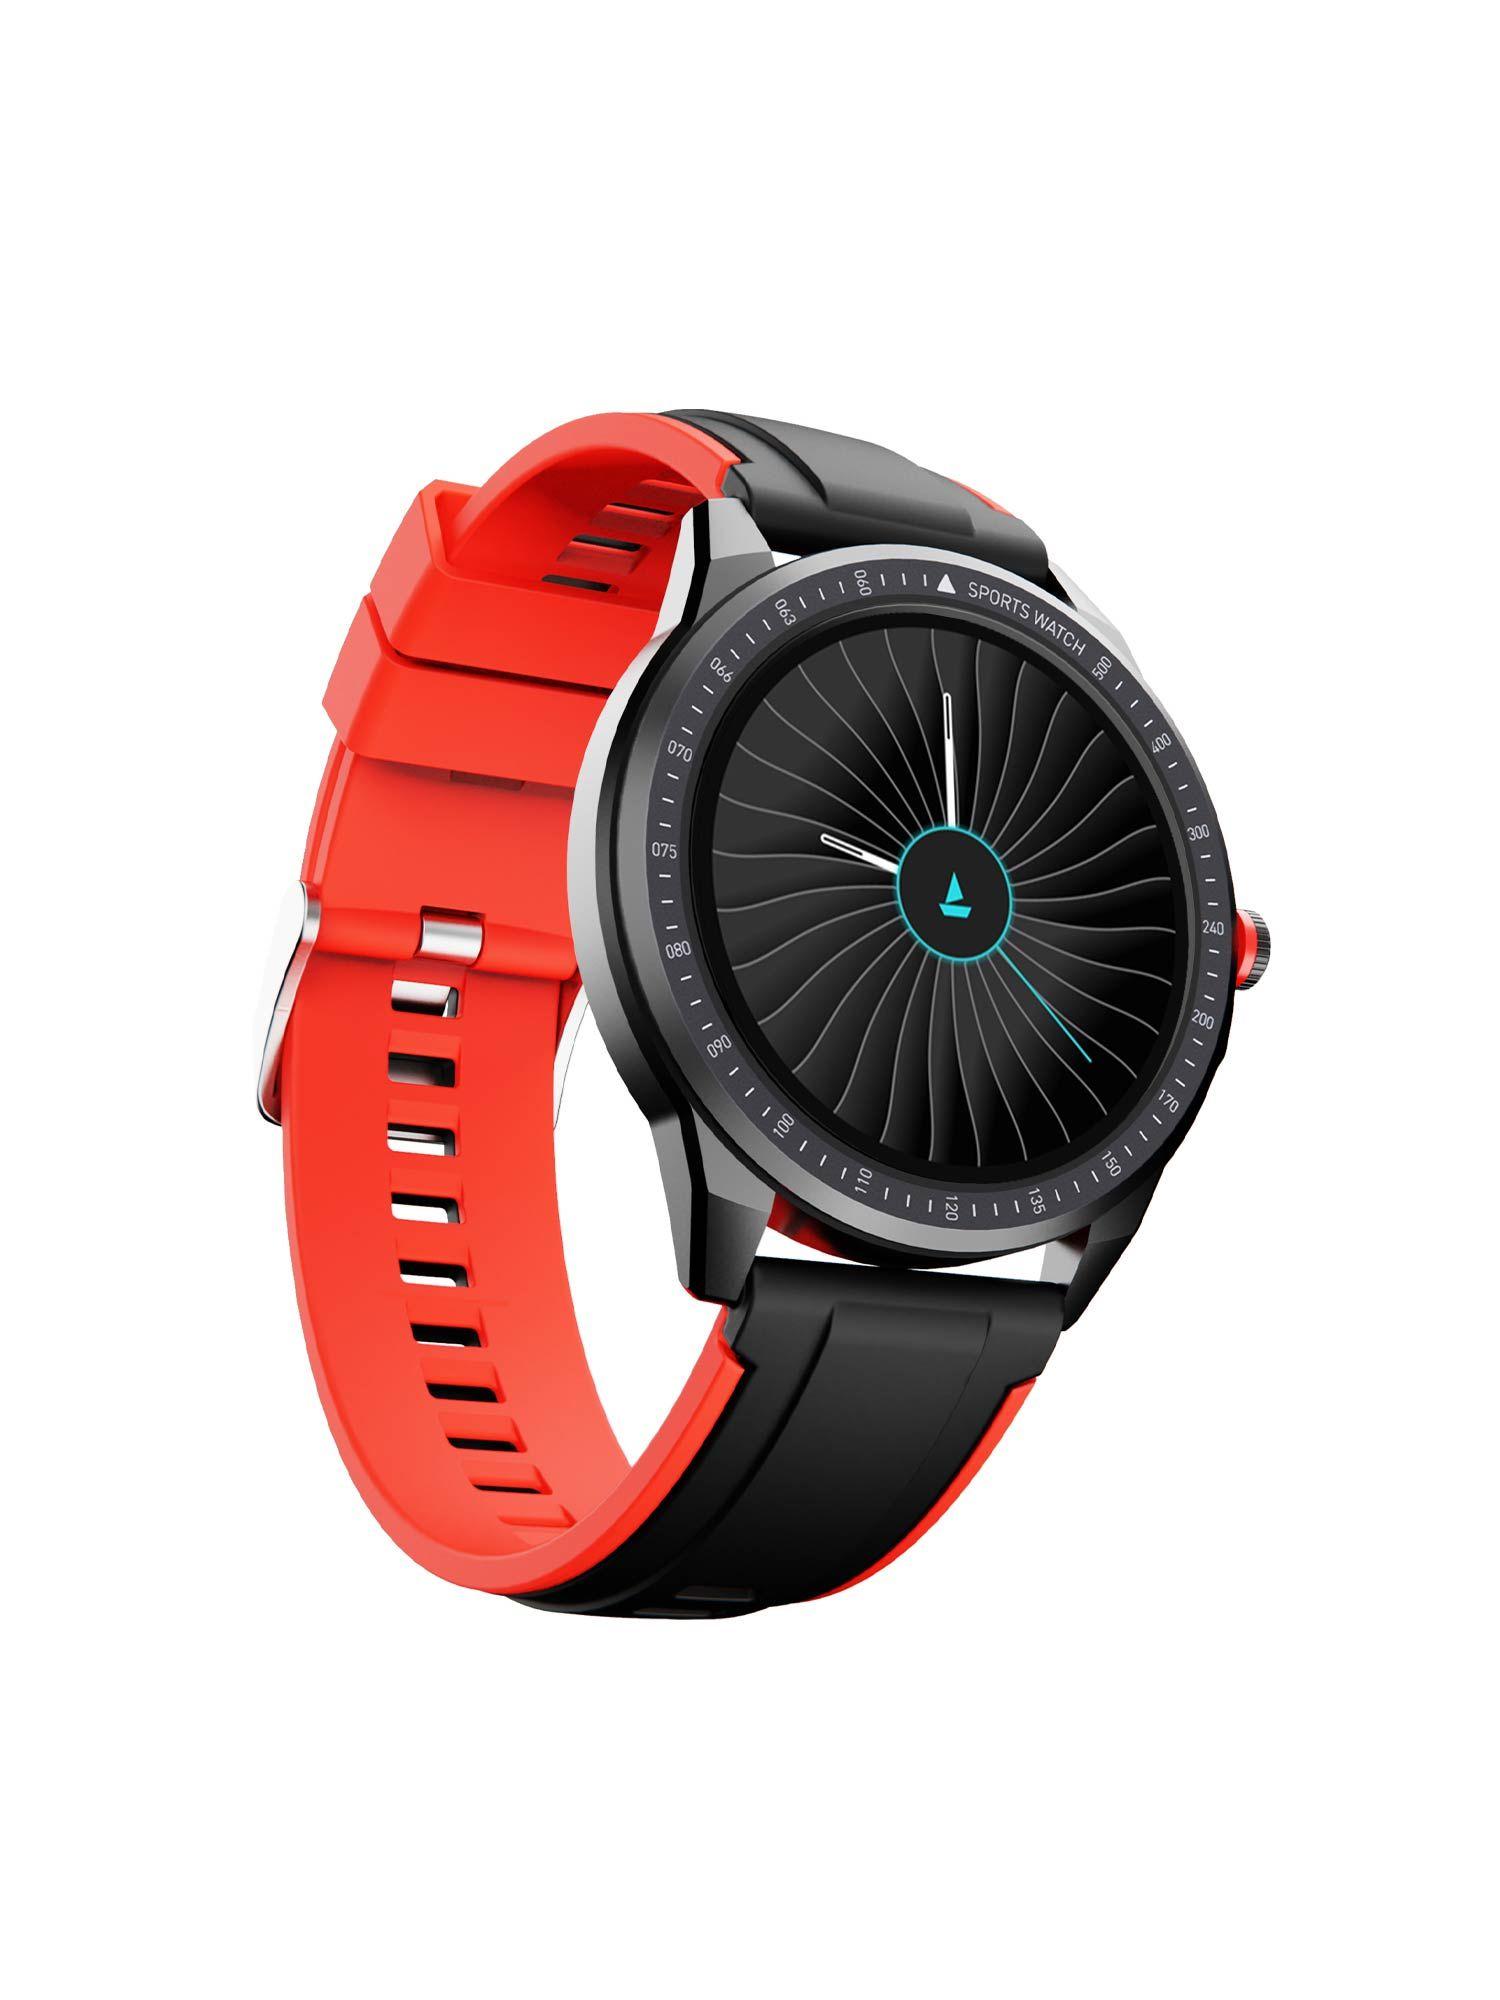 watch flash rtl smart watch with activity tracker, 7 days battery life - red